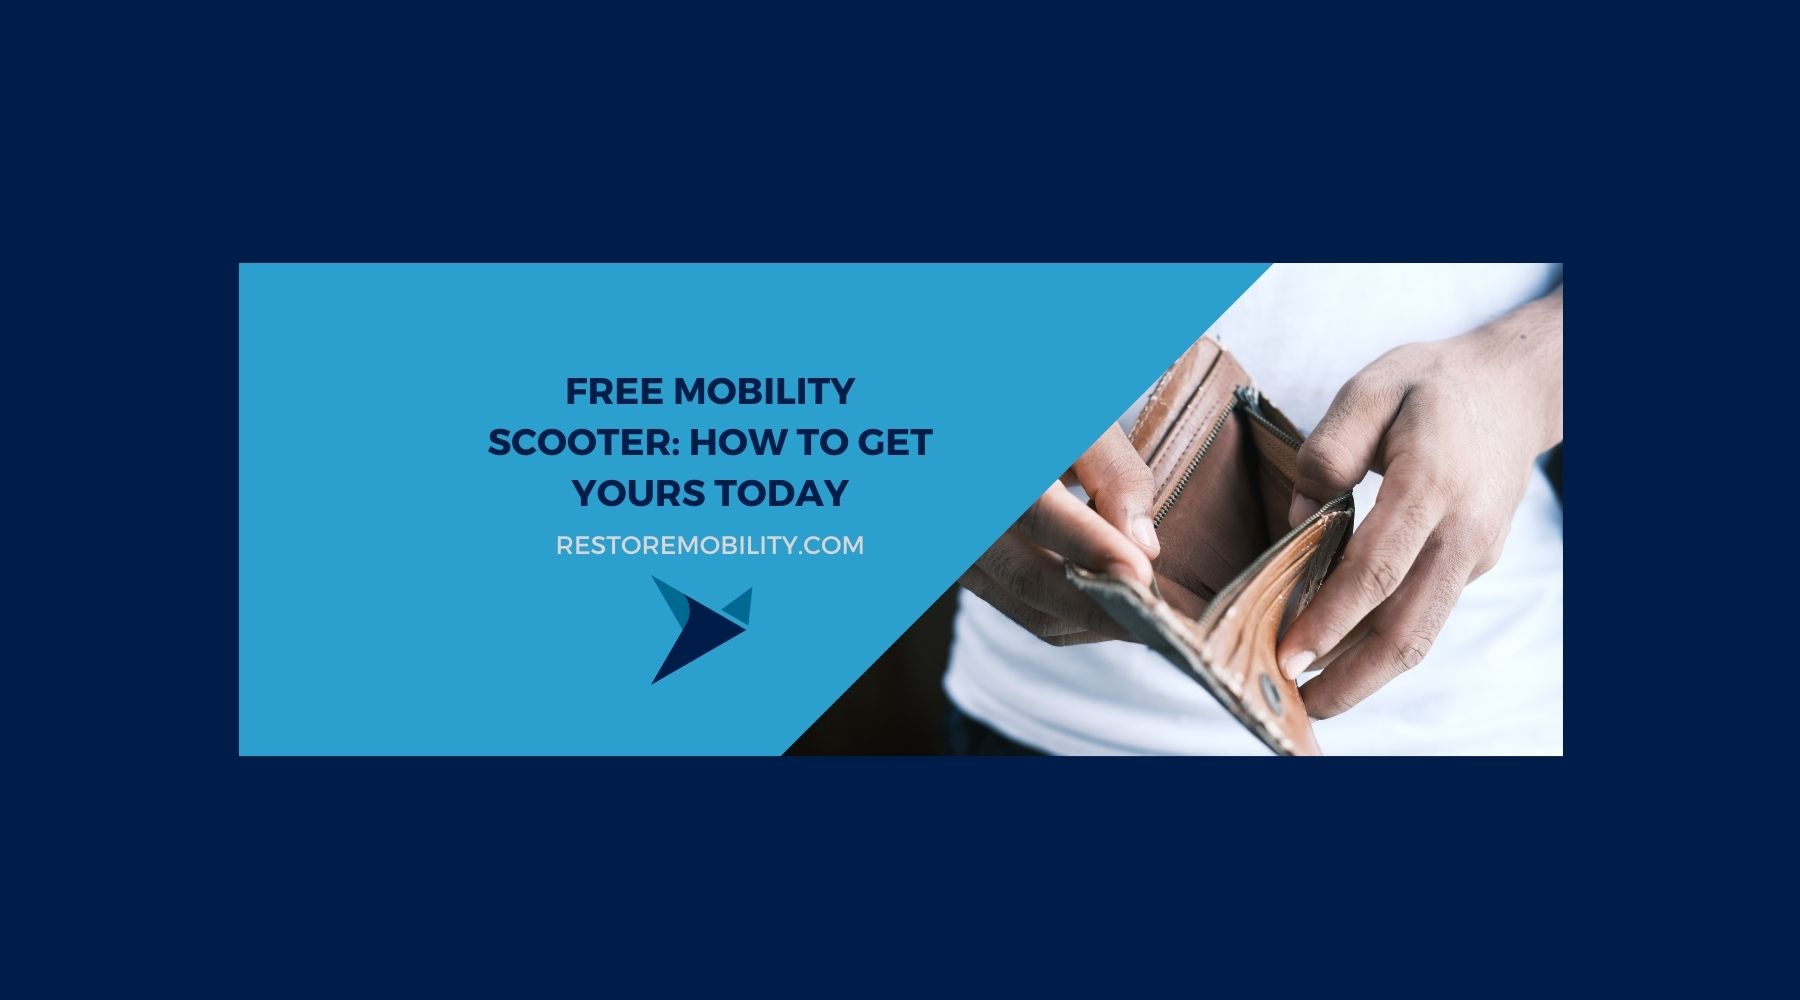 Free Mobility Scooter: How to Get Yours Today